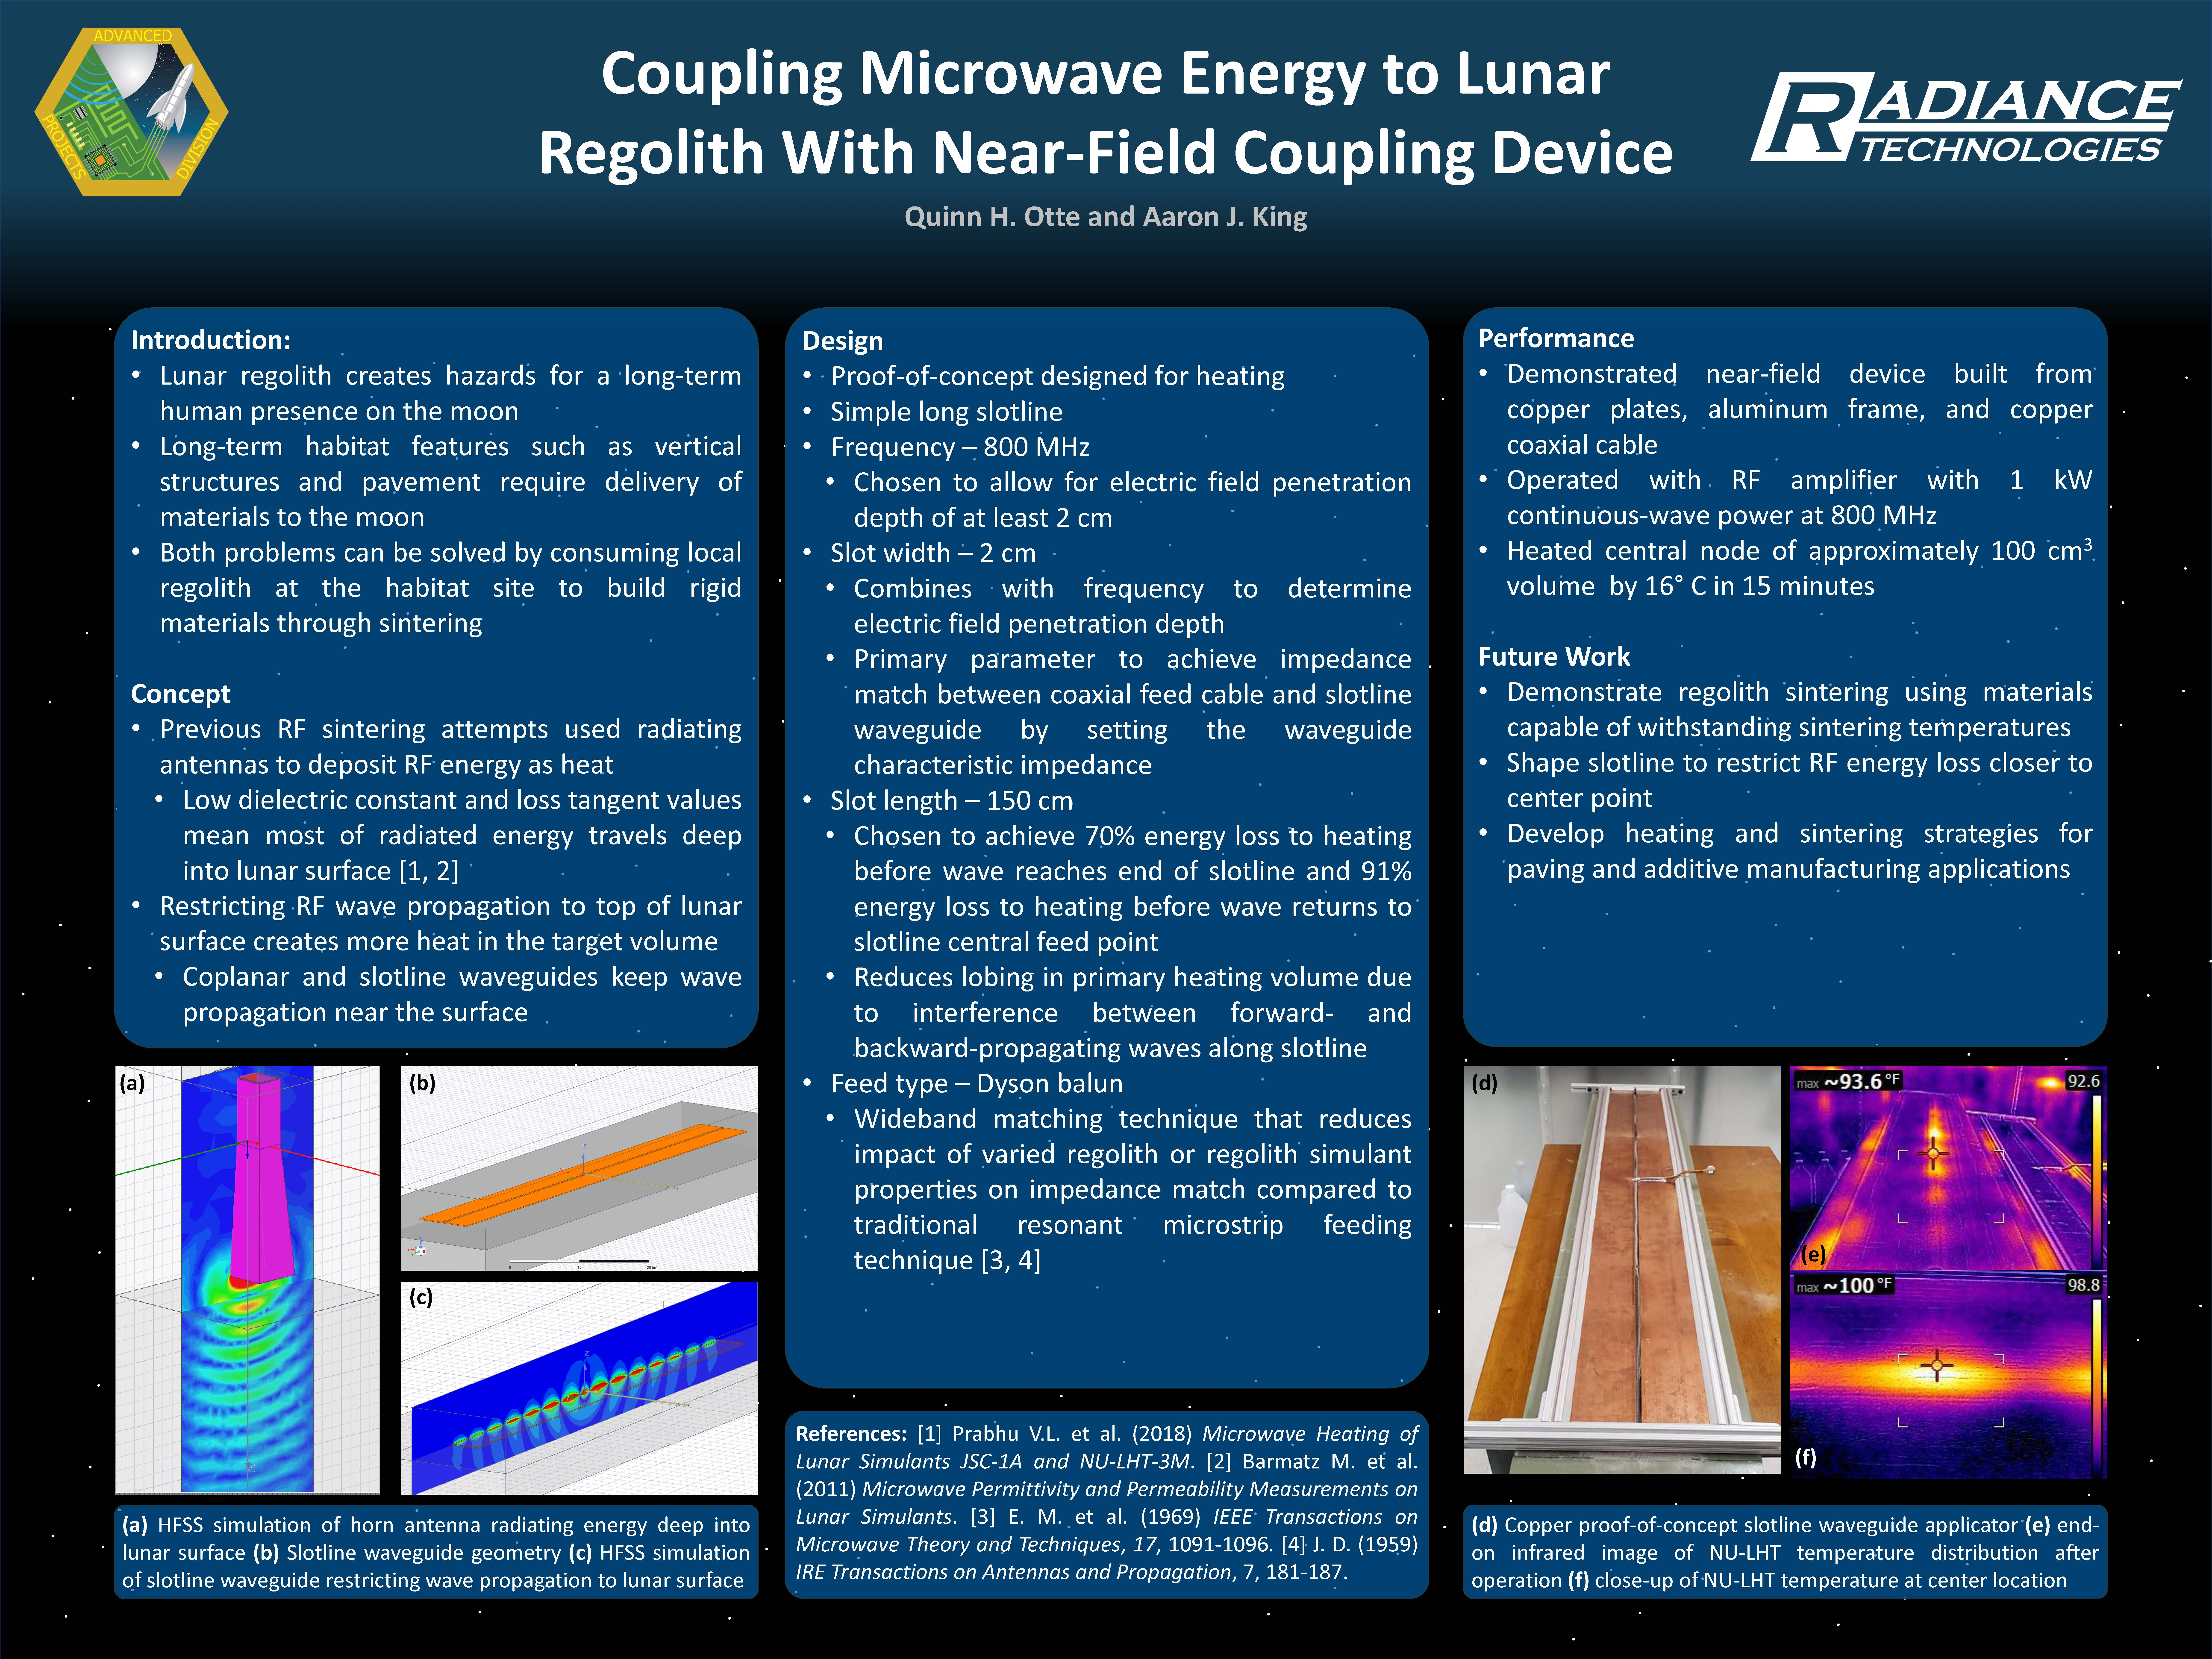 Coupling Microwave Energy to Lunar Regolith With Near-Field Coupling Device